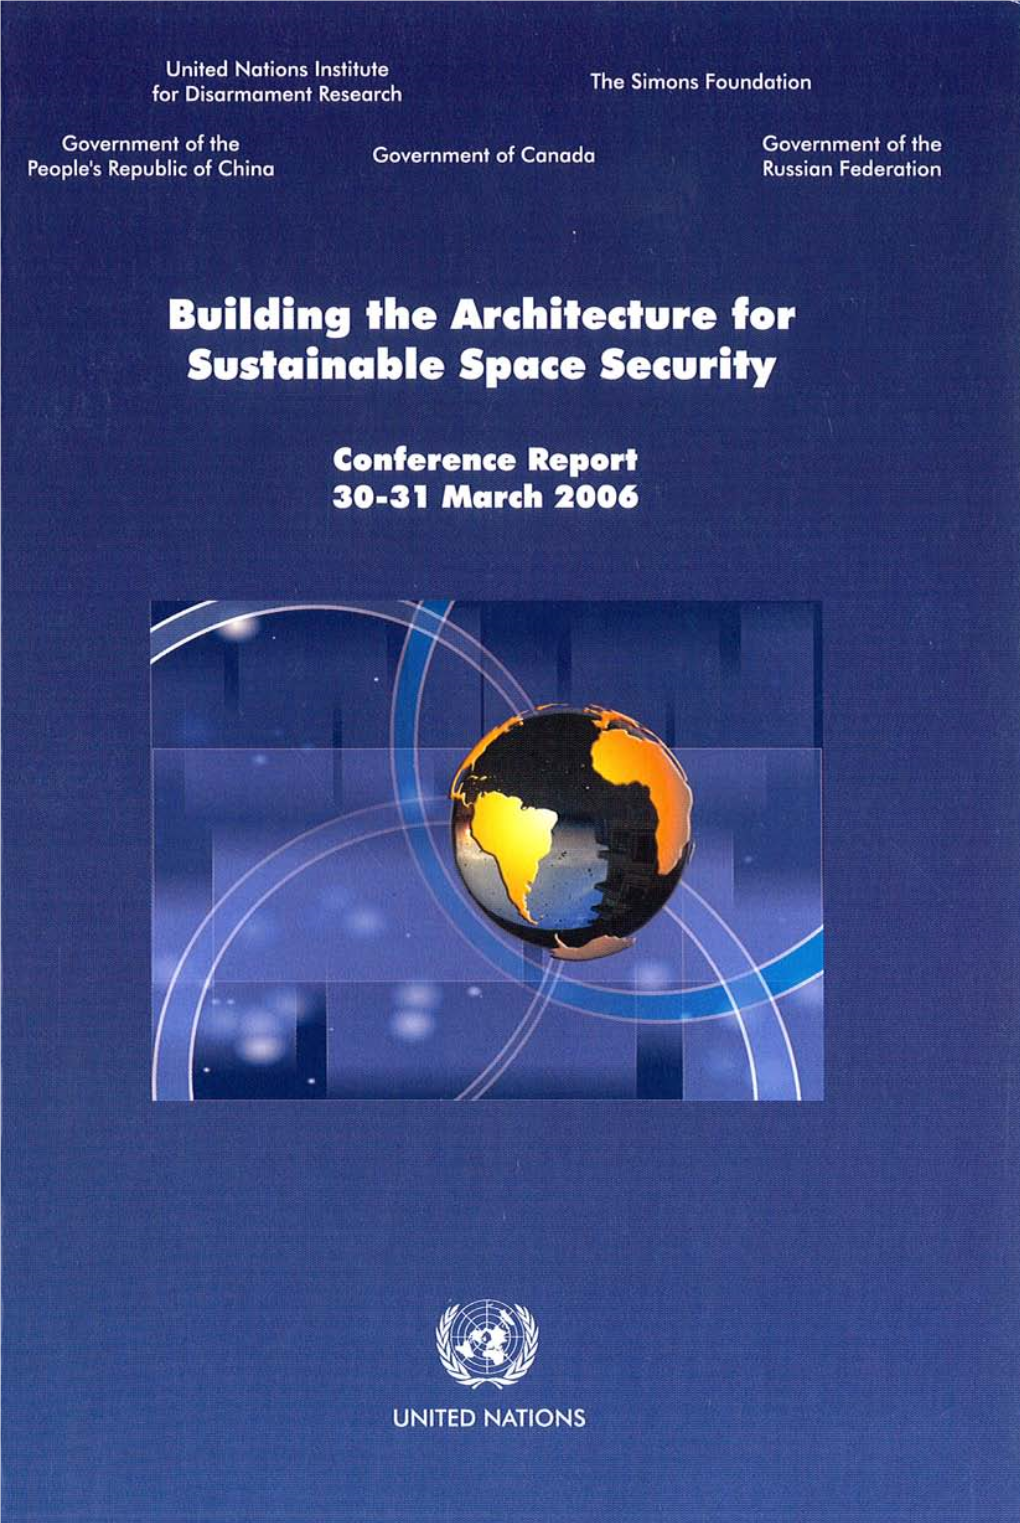 Building the Architecture for Sustainable Space Security